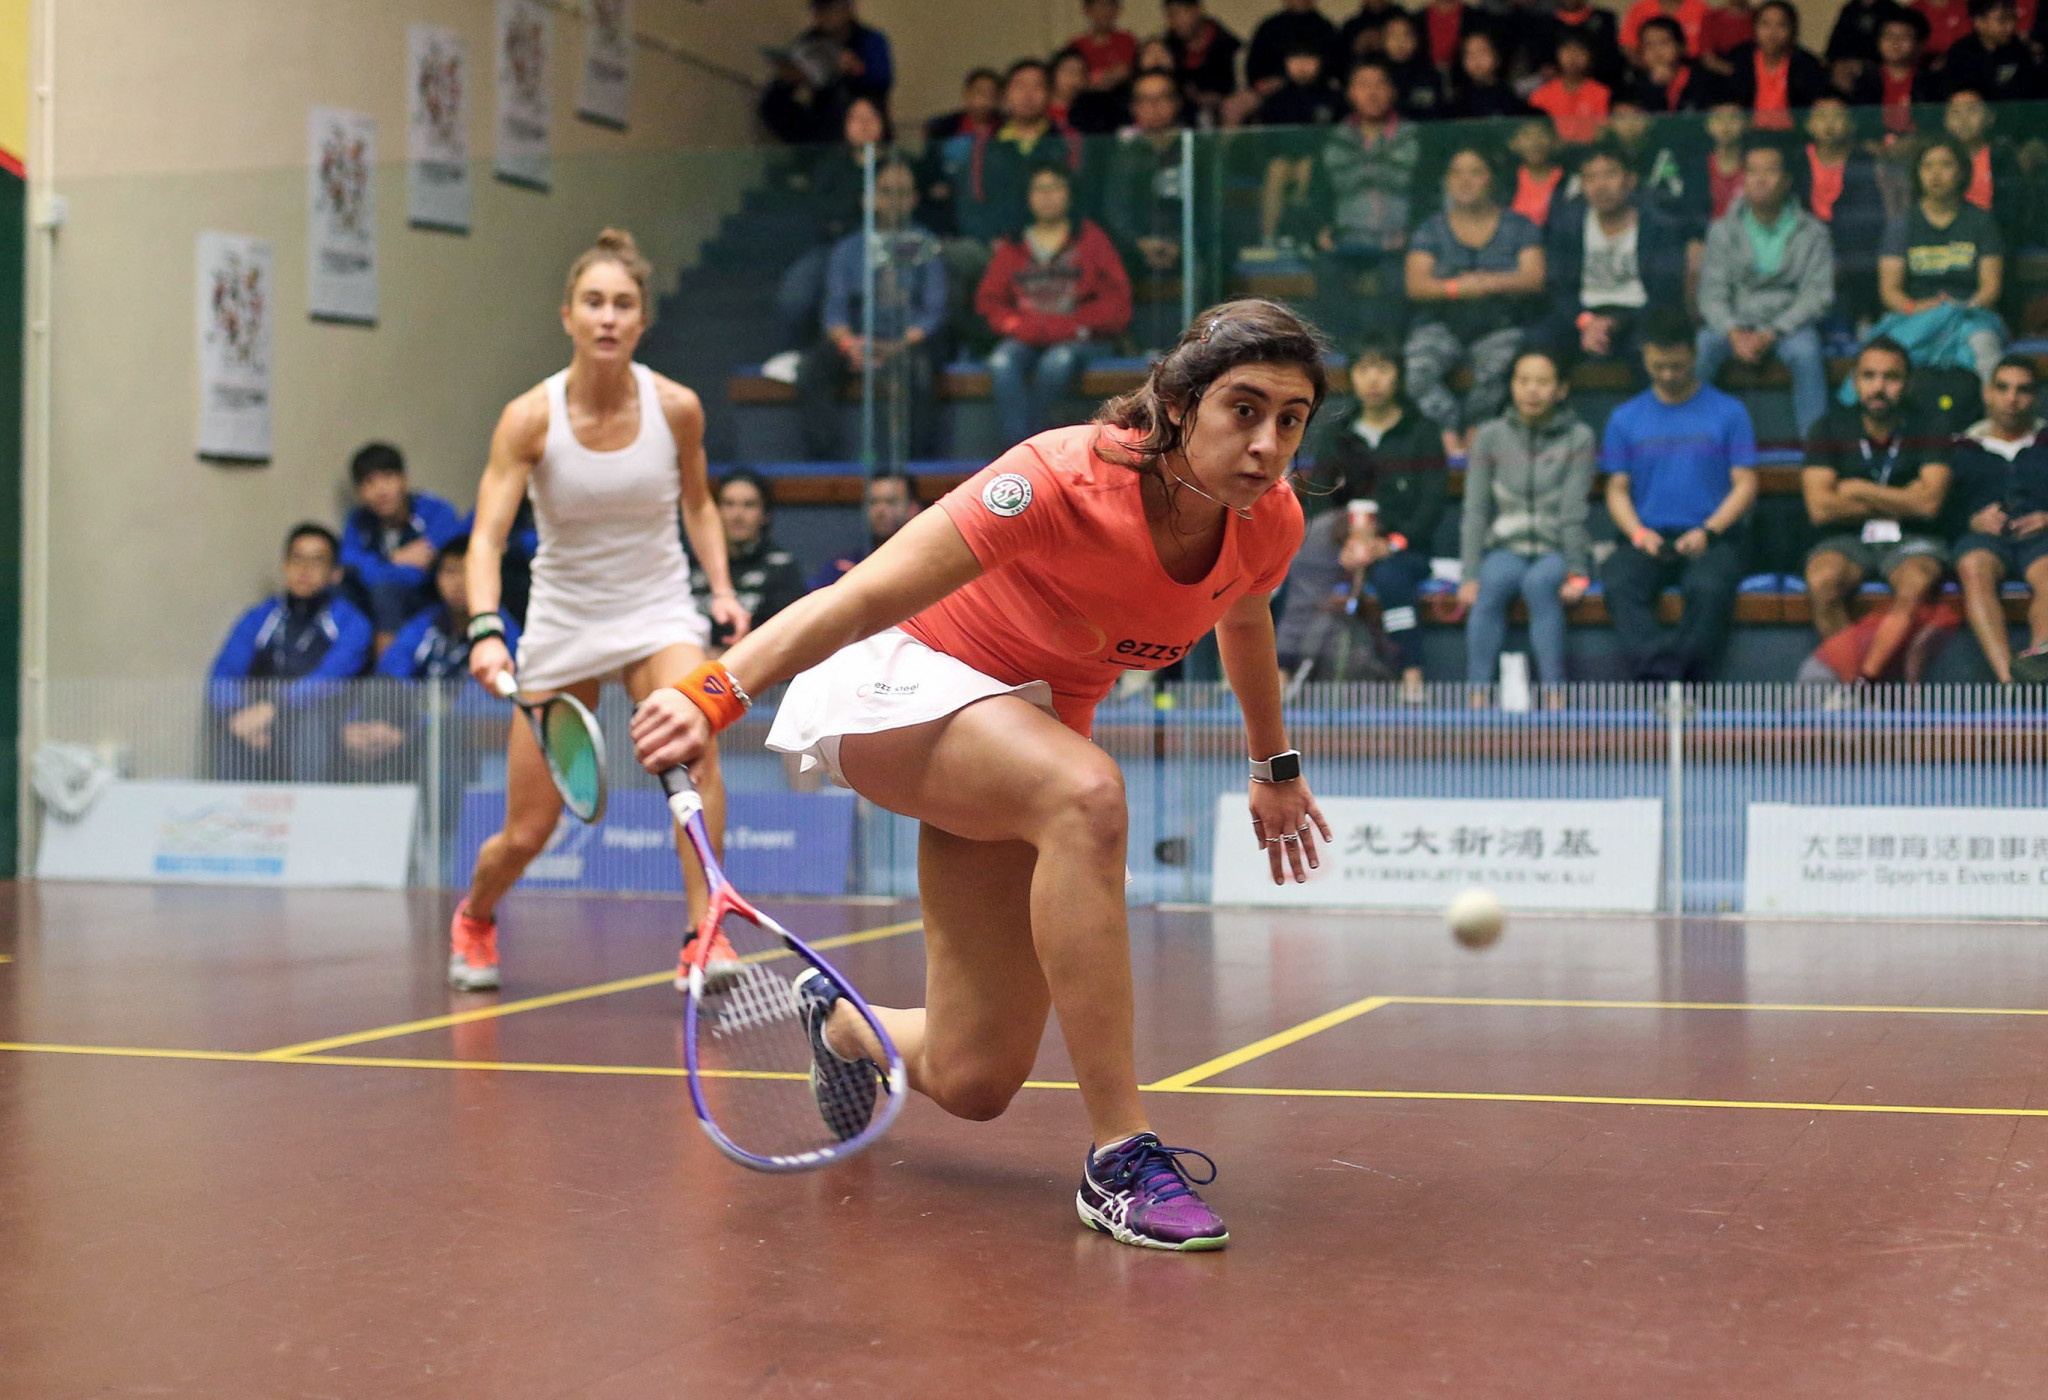 Egypt's Nour El Sherbini won her first game of the PSA Hong Kong Open to get her title defence underway ©PSA